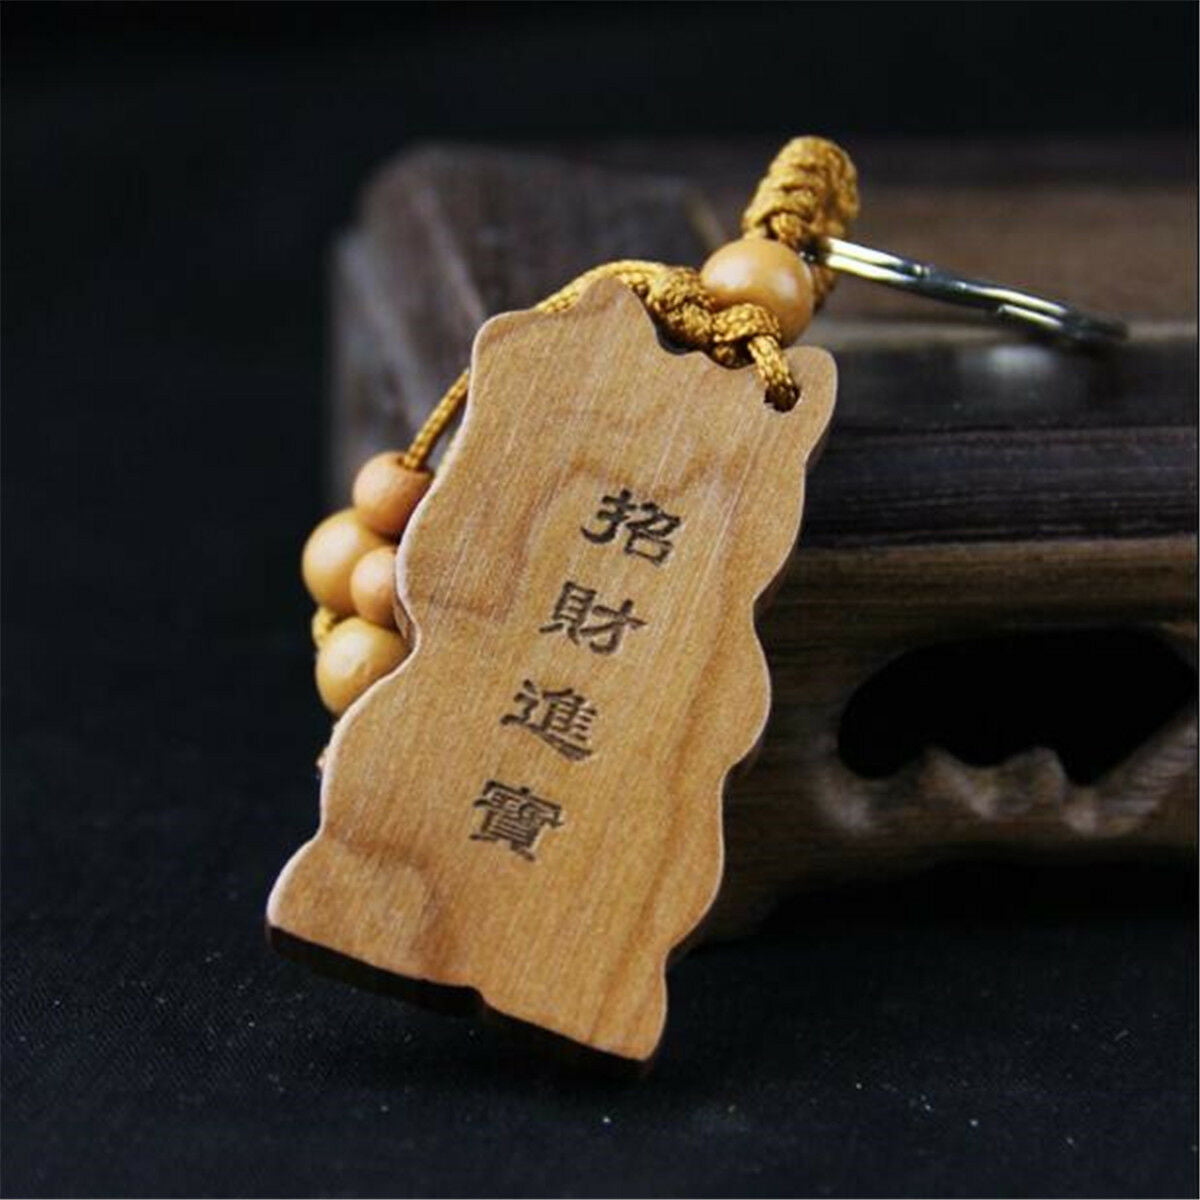 1pc Peach Wood Carving Lucky Fortune Cat Pendant Keychain Key Ring Bag Decor